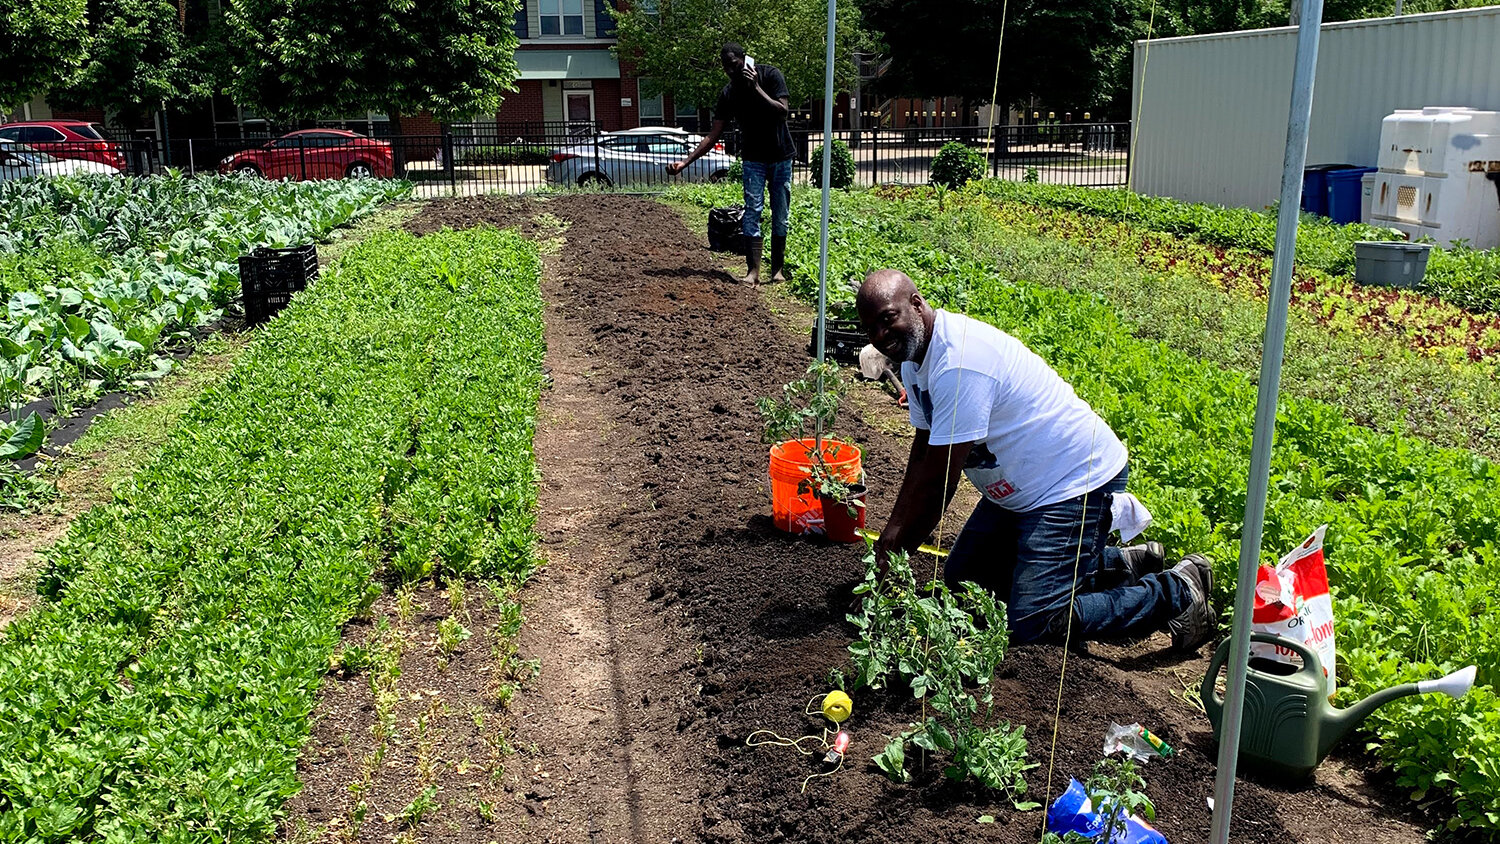  Windy City Harvest assists incubator farmers in setting up small farm businesses to grow produce at Legends Farm in Bronzeville. Photo courtesy of Chicago Horticultural Society. 